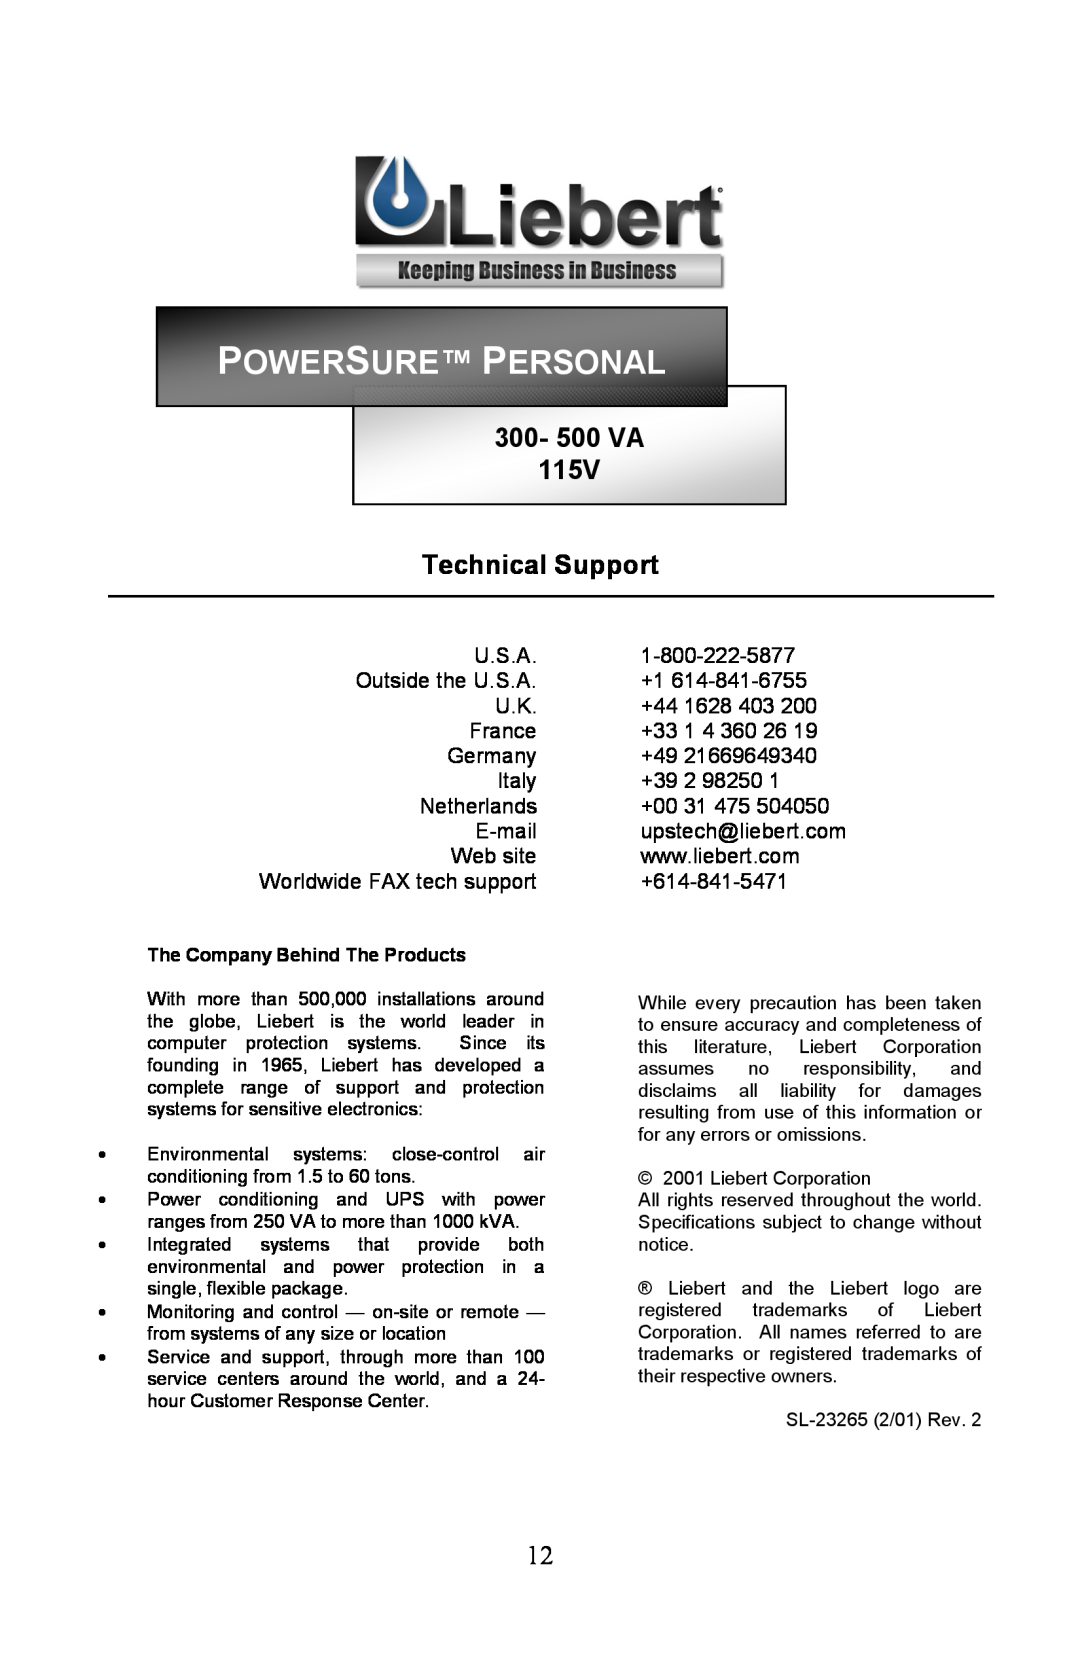 Liebert PowerSure Personal Powersure Personal, 300- 500 VA 115V Technical Support, The Company Behind The Products 